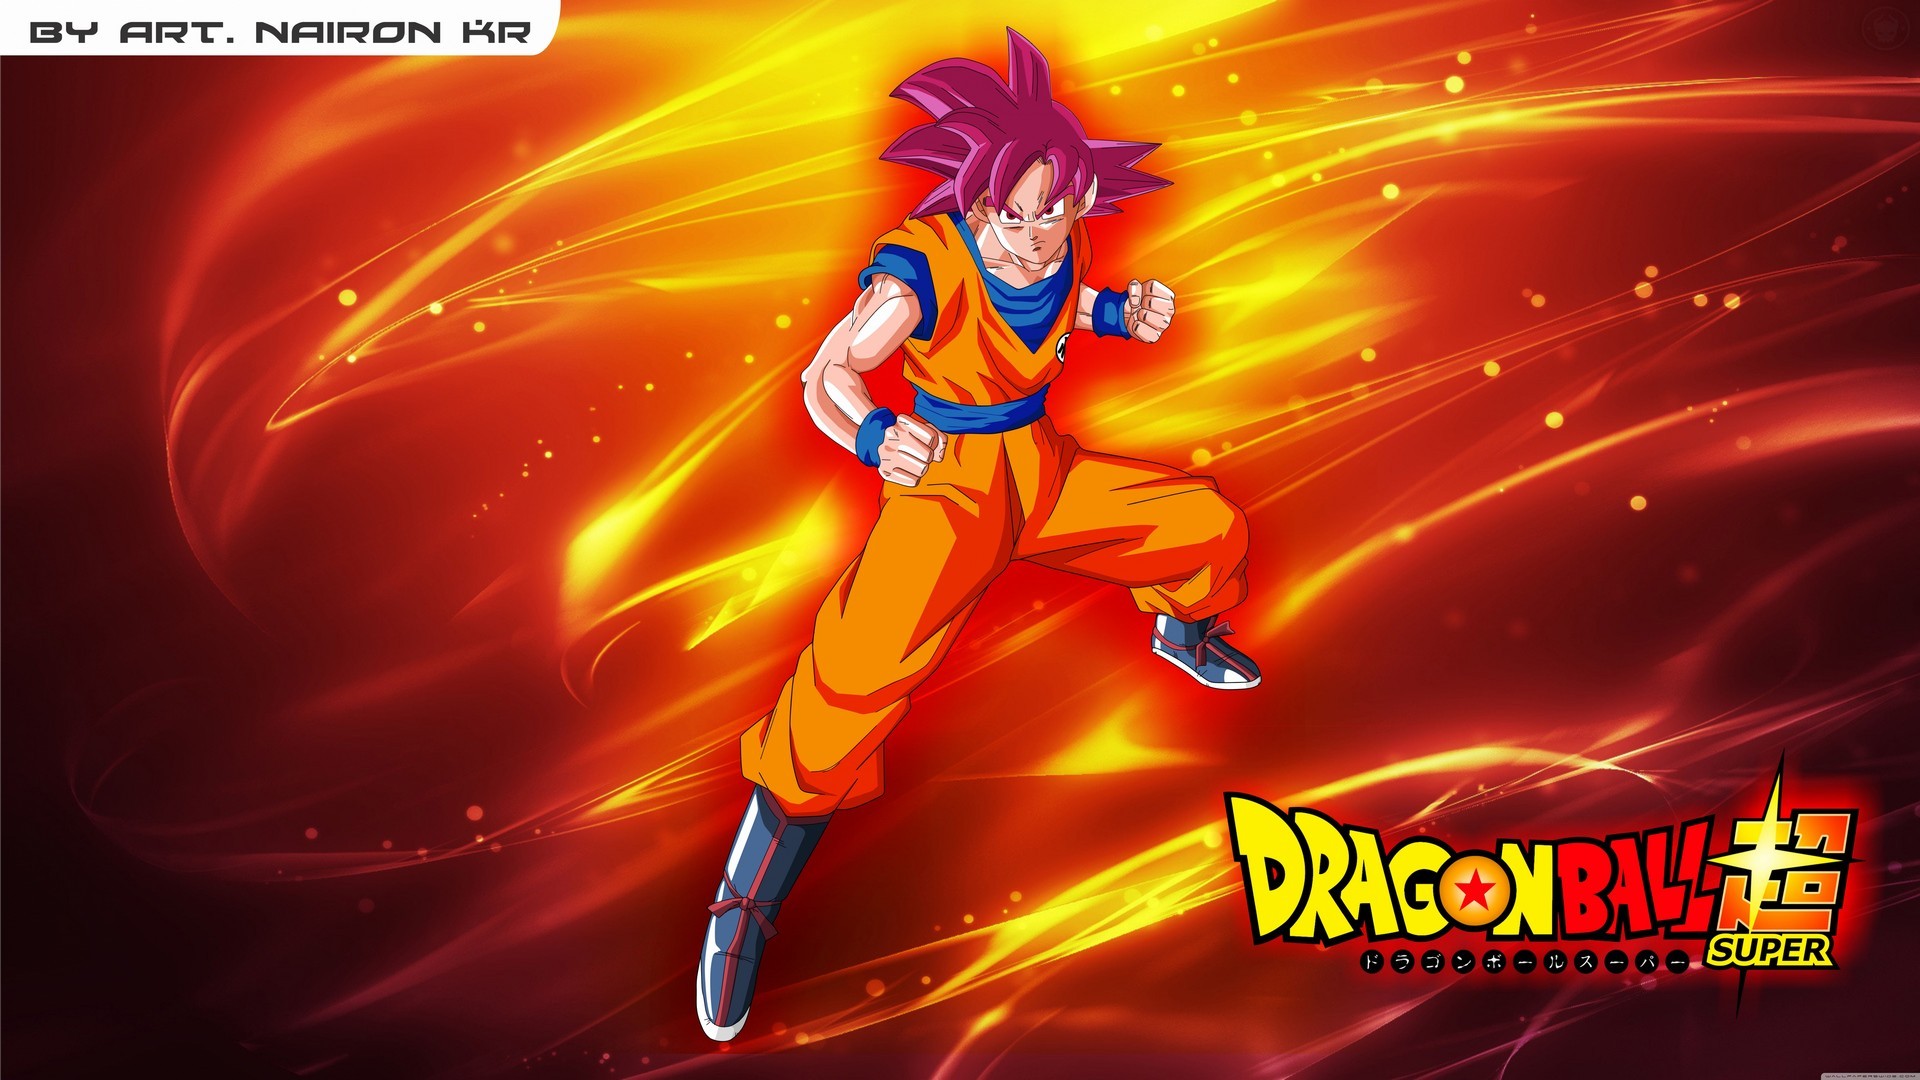 Goku Super Saiyan God HD Wallpaper with image resolution 1920x1080 pixel. You can make this wallpaper for your Desktop Computer Backgrounds, Mac Wallpapers, Android Lock screen or iPhone Screensavers